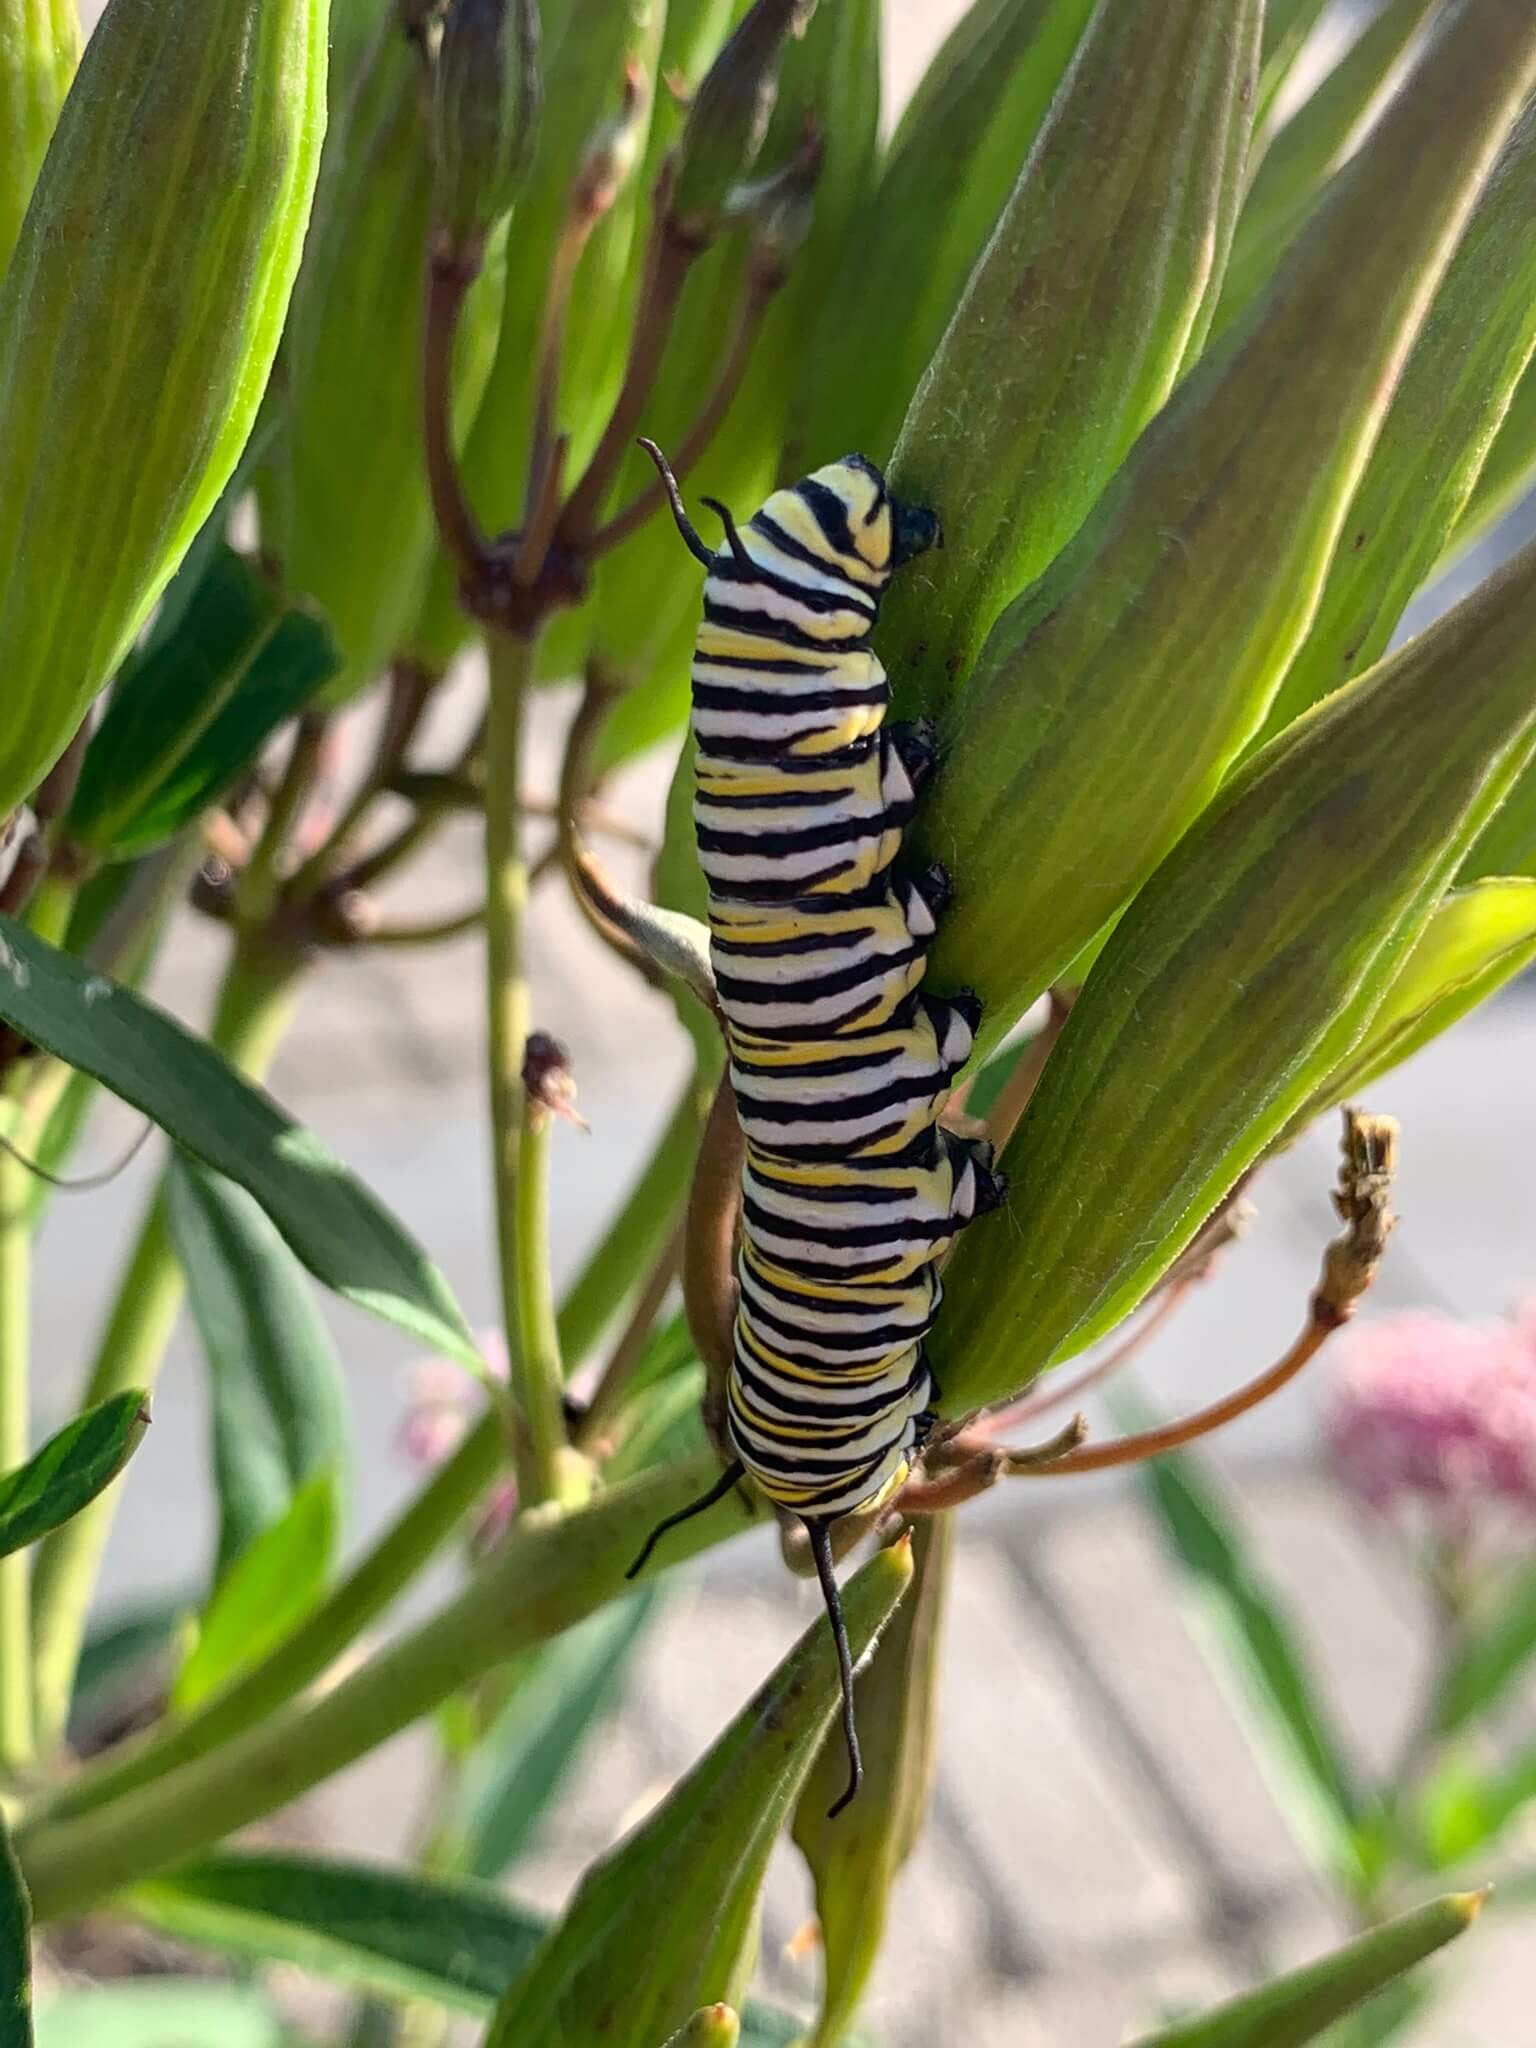 A rare sight these days, a monarch butterfly caterpillar in the vineyard